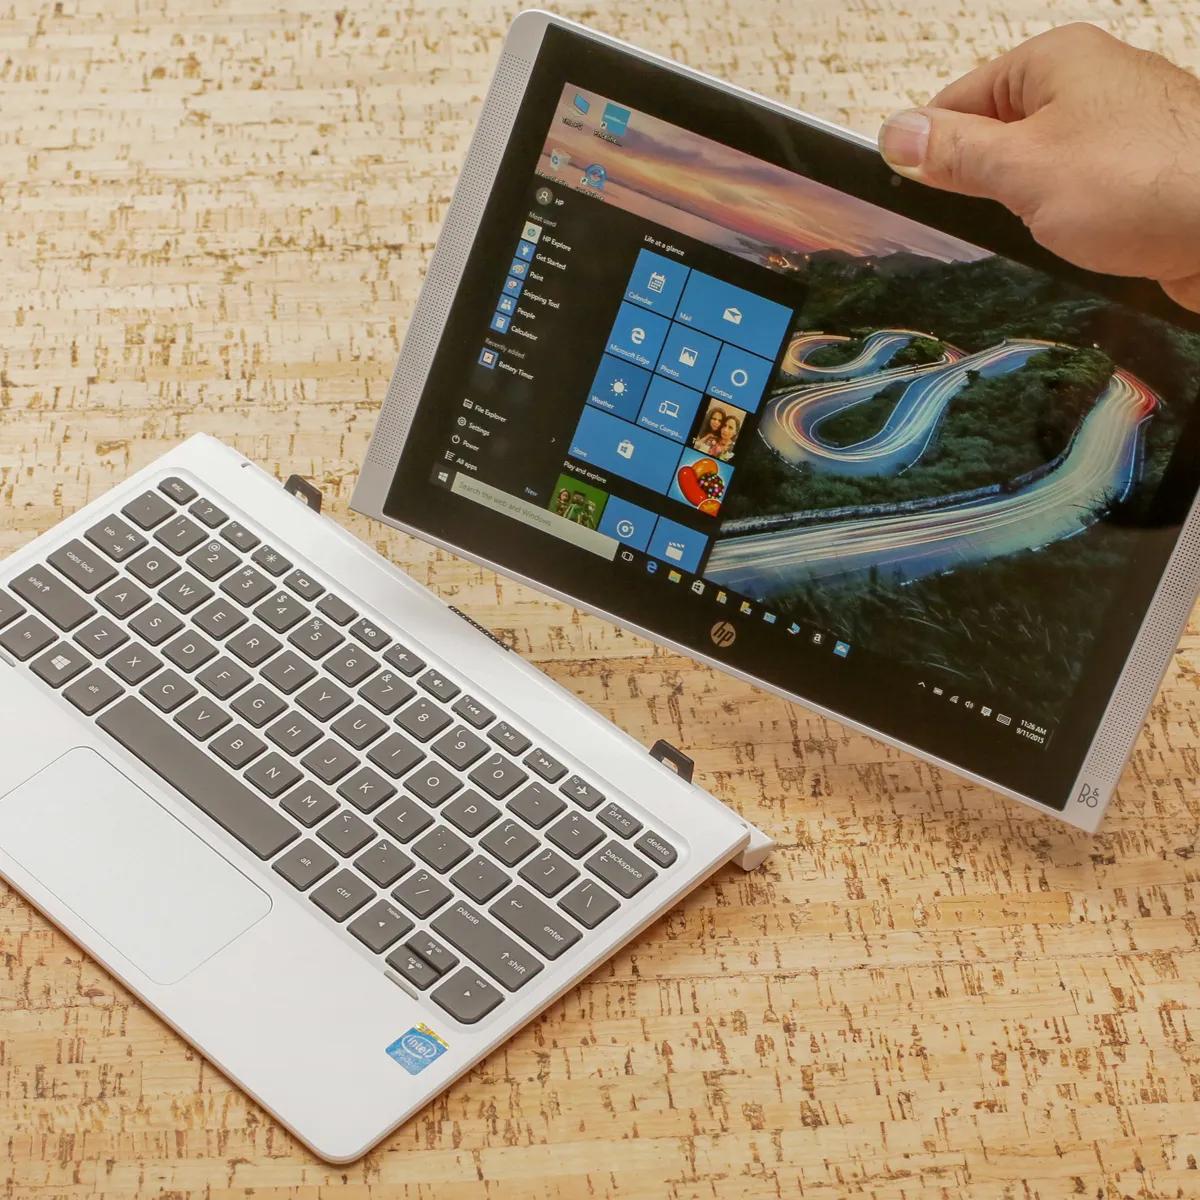 Hp tablet laptop: the ultimate power and portability combo